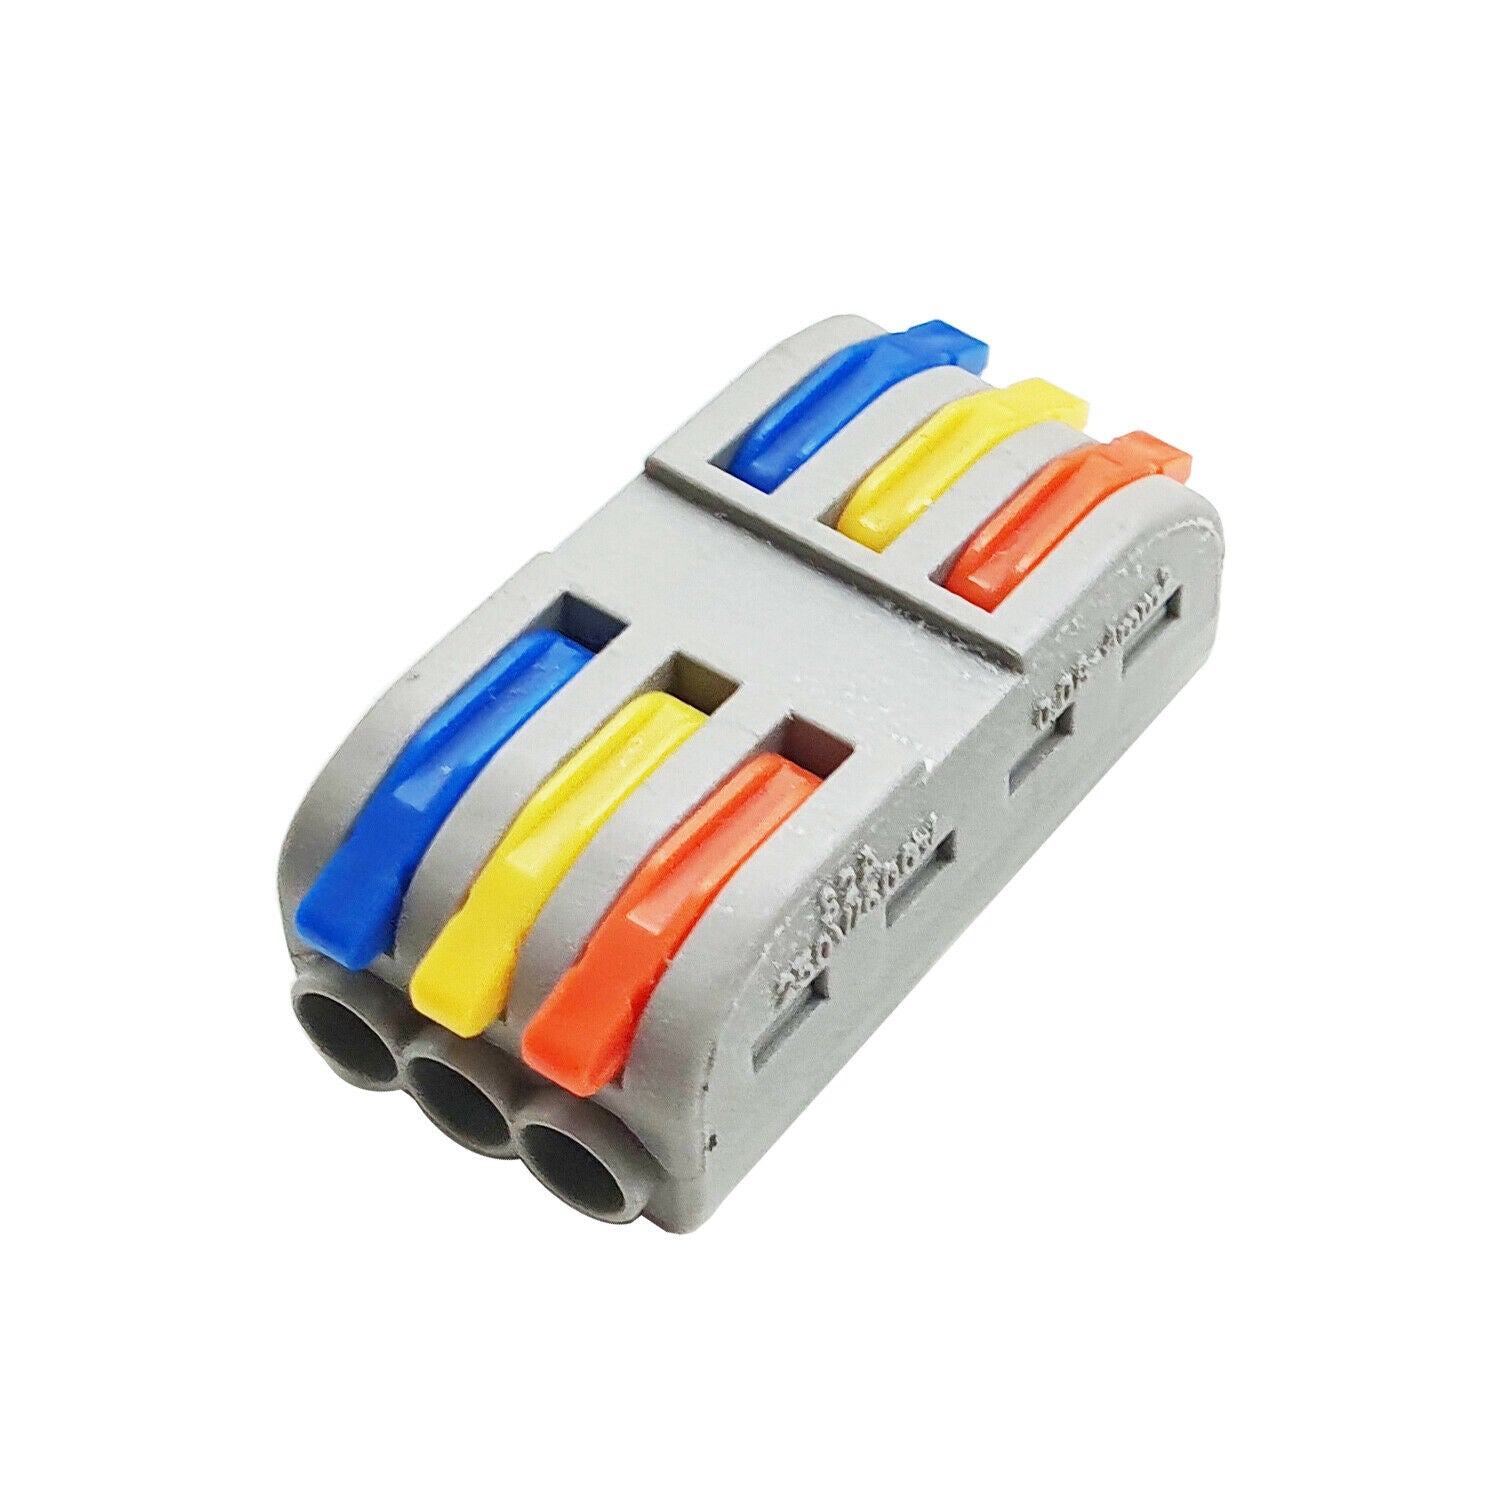 2/3 Way Electrical Connectors Wire Block Clamp Clips Fast Cable Reusable Lever~2163 - LEDSone UK Ltd